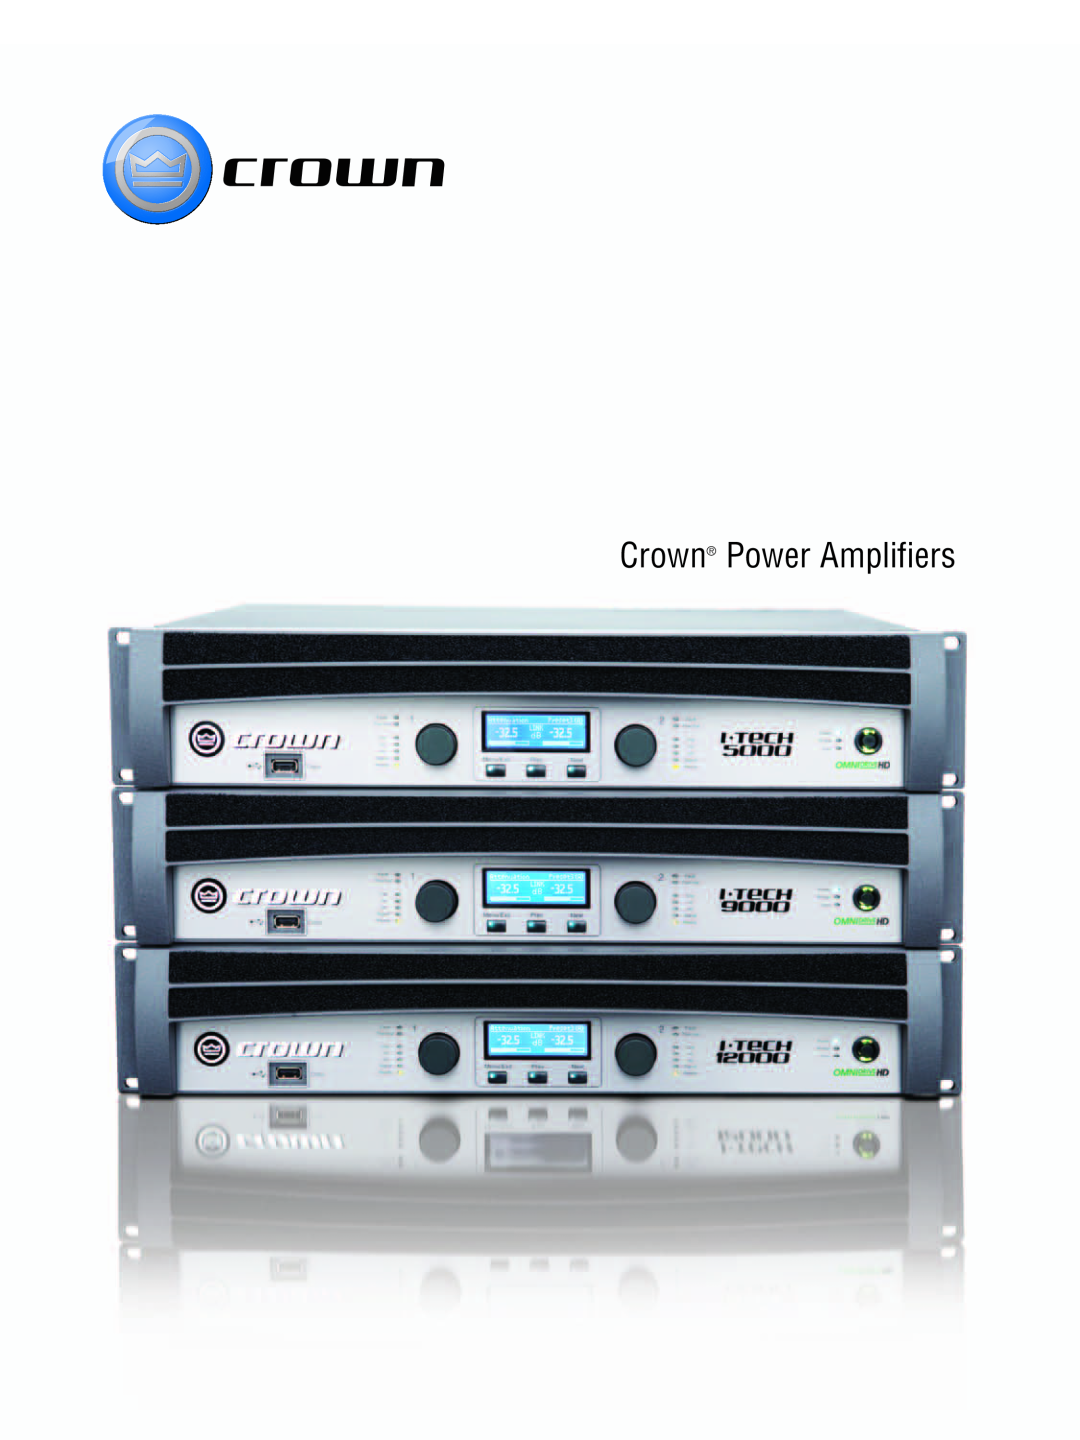 Crown CTS 2000, CTS 3000, CTS 1200, CTS 600 manual Crown Power Amplifiers 